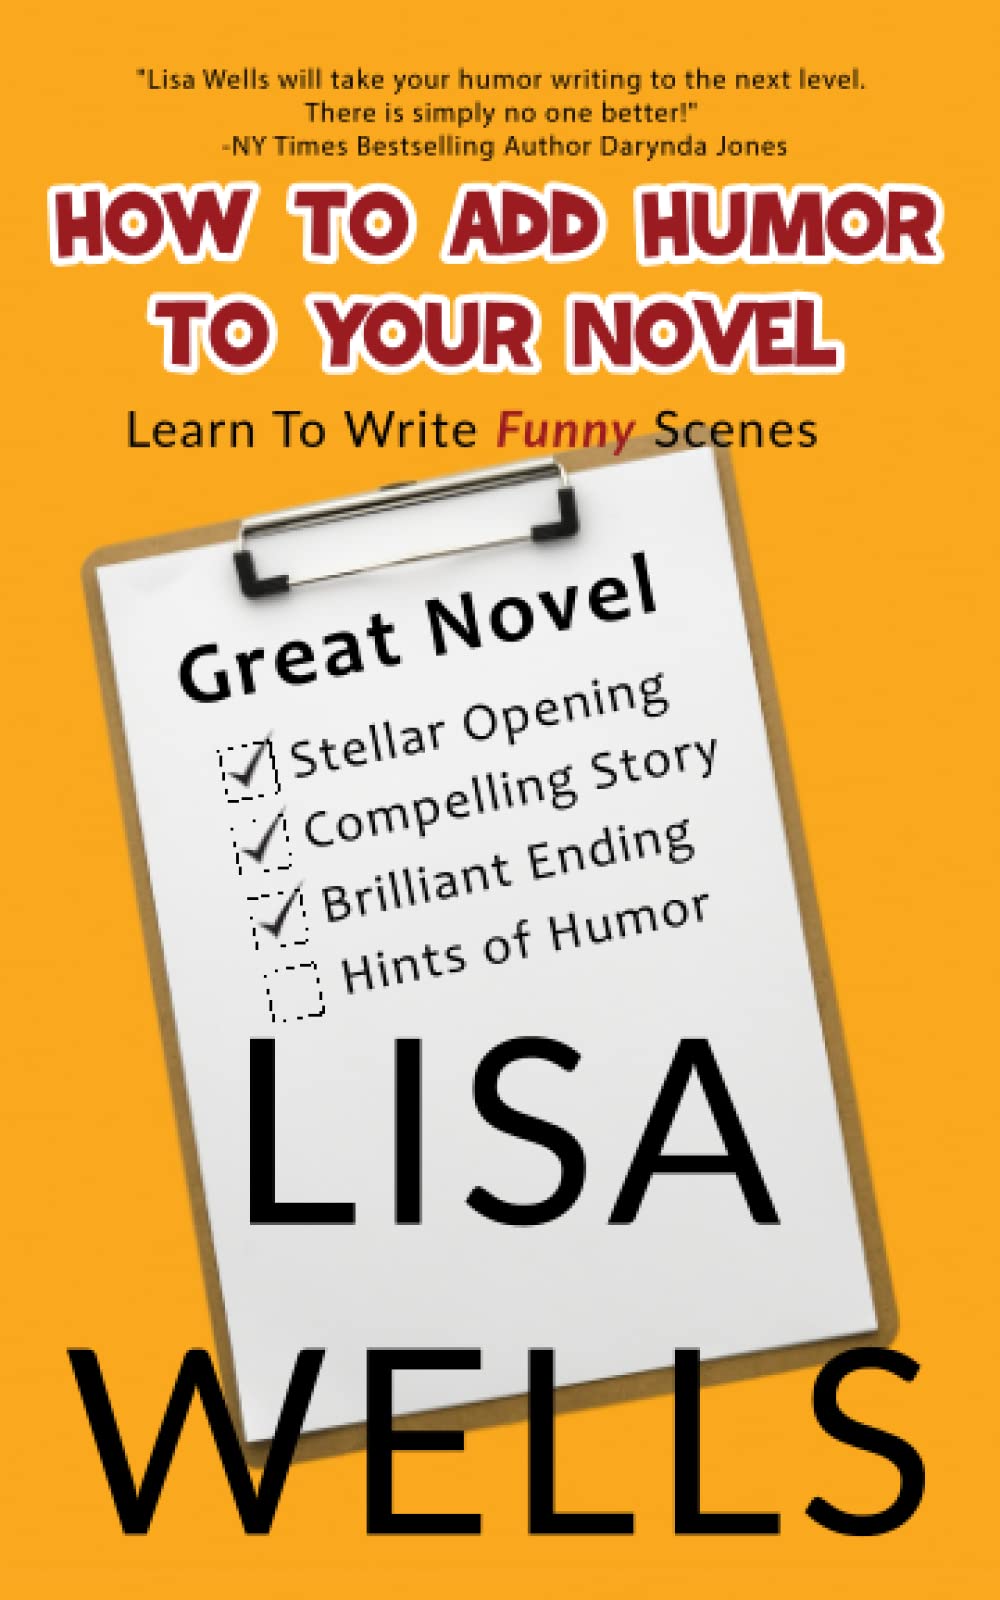 How To Add Humor To Your Novel: Learn To Write Funny Scenes